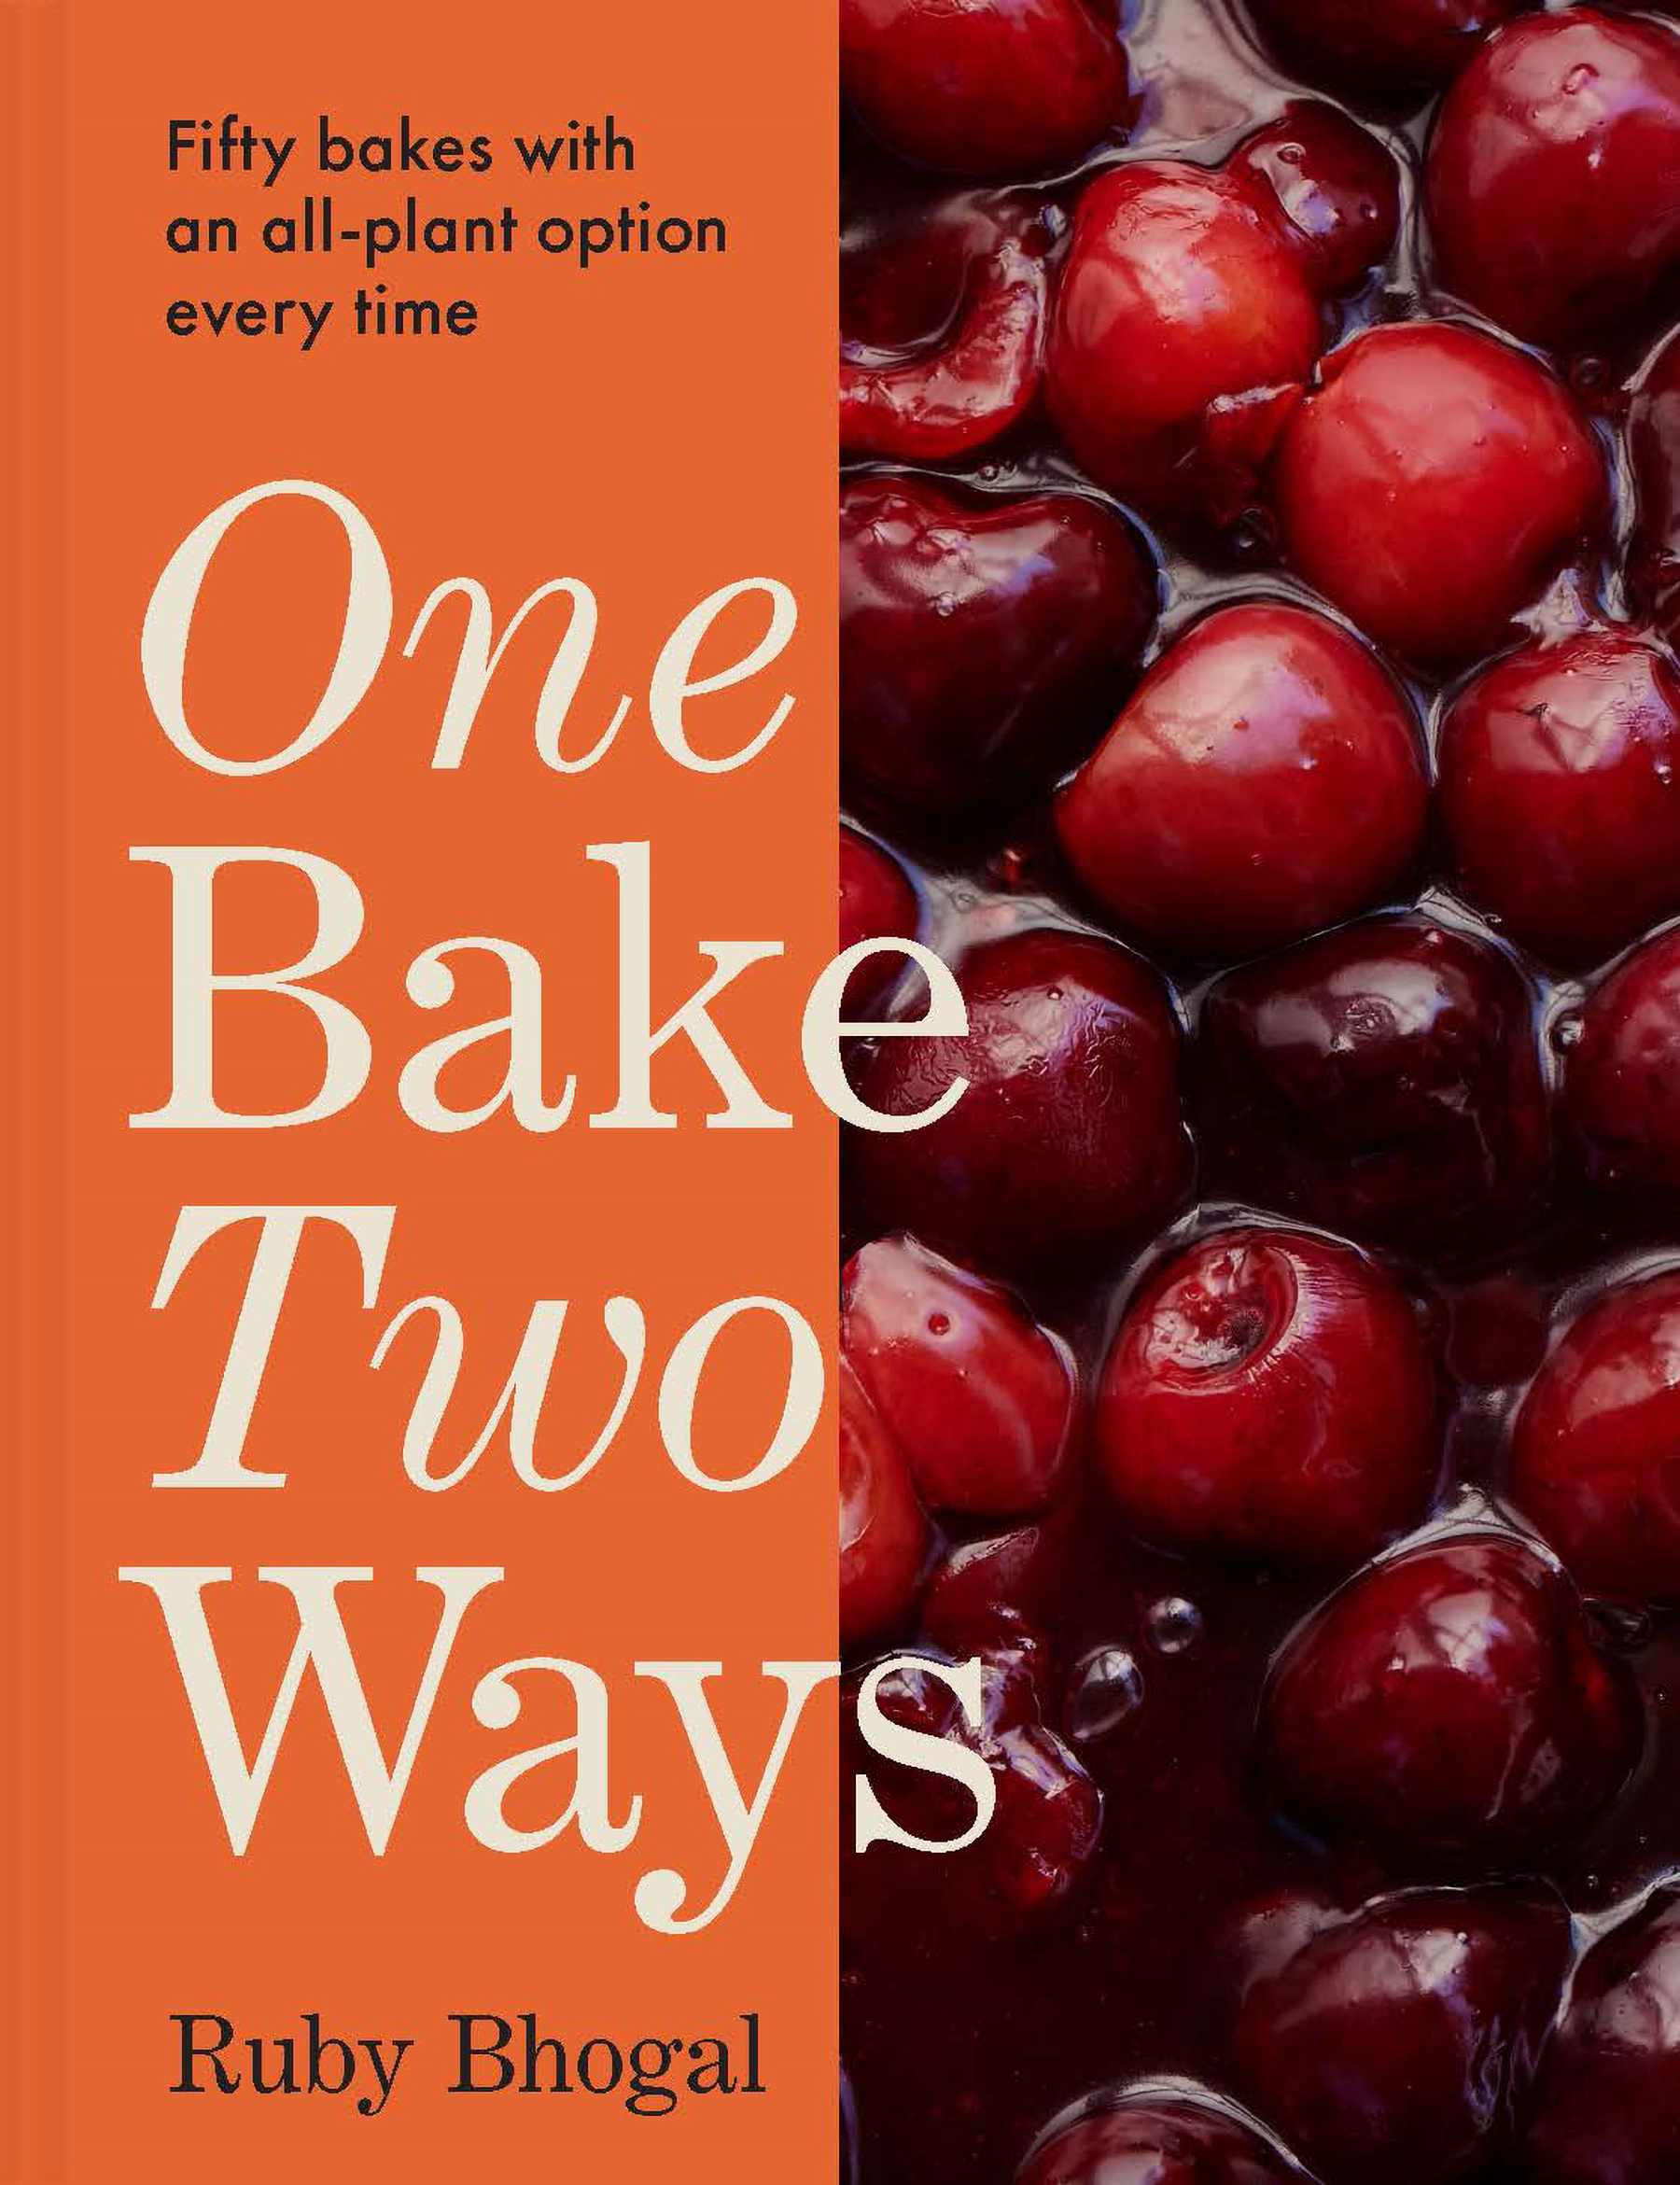 One Bake, Two Ways